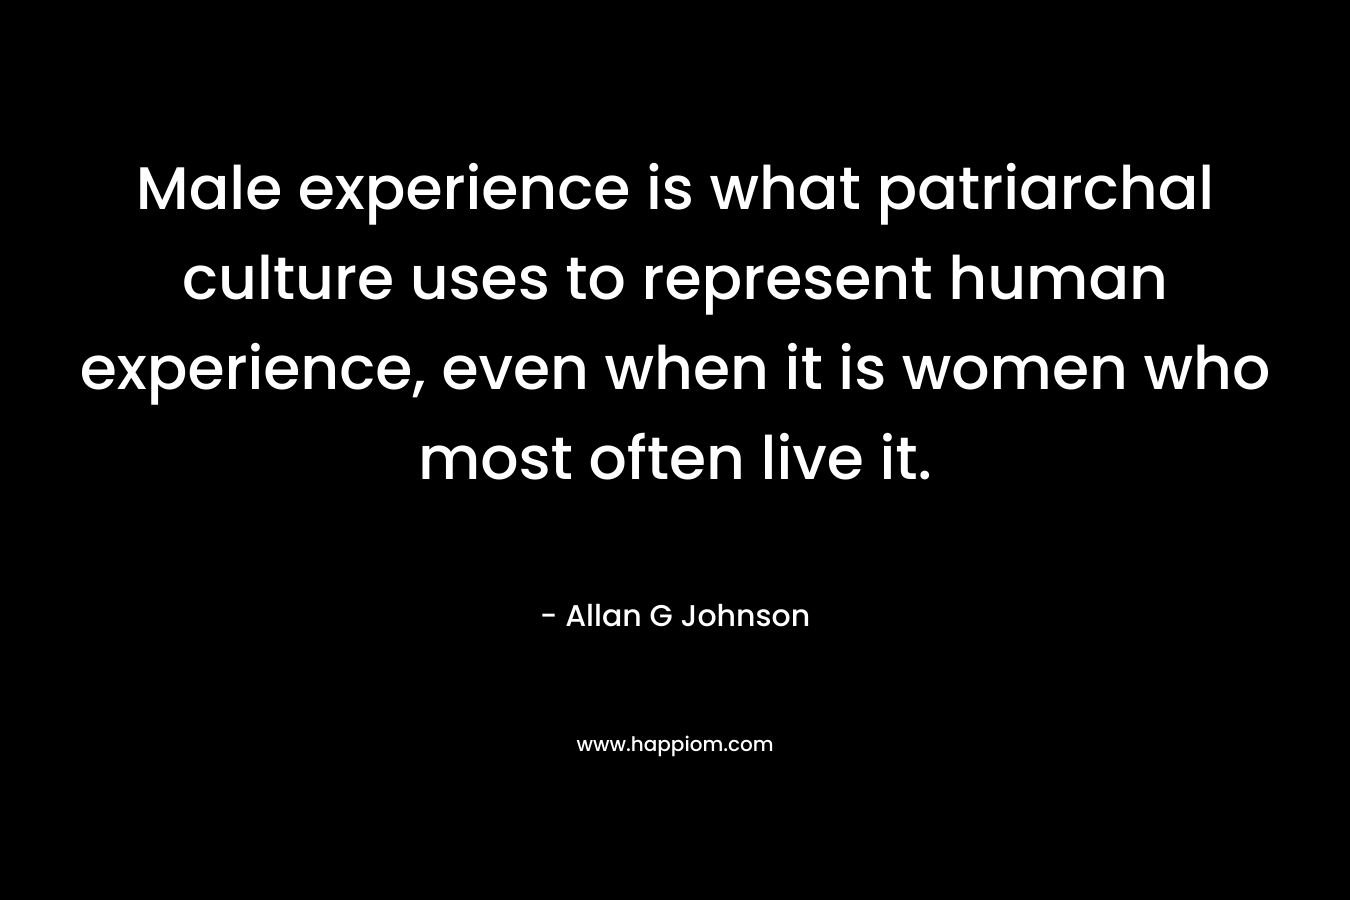 Male experience is what patriarchal culture uses to represent human experience, even when it is women who most often live it.